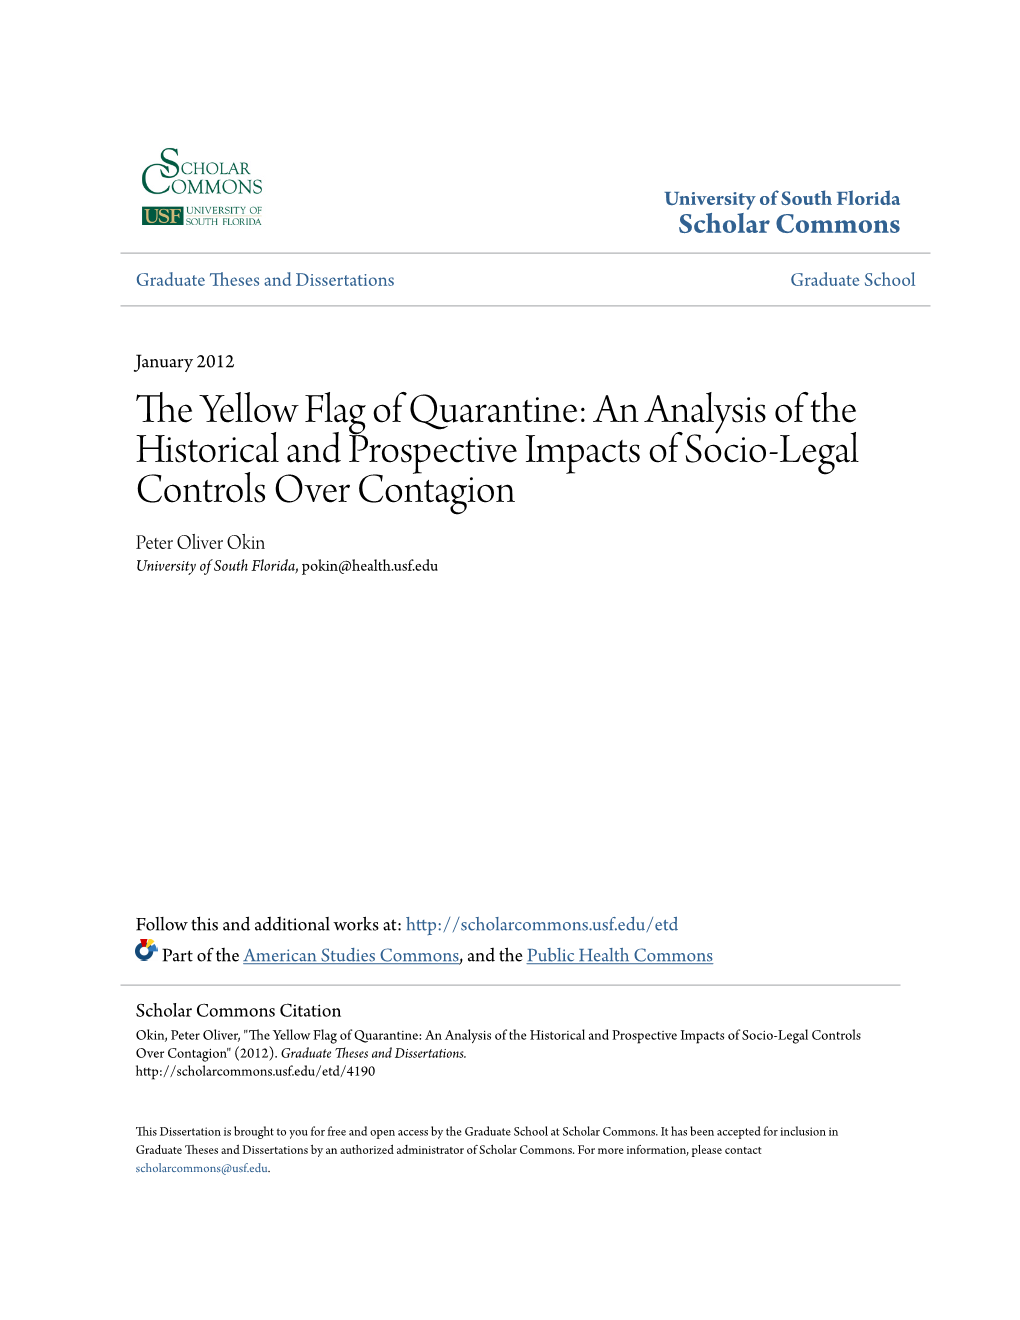 The Yellow Flag of Quarantine: an Analysis of the Historical And